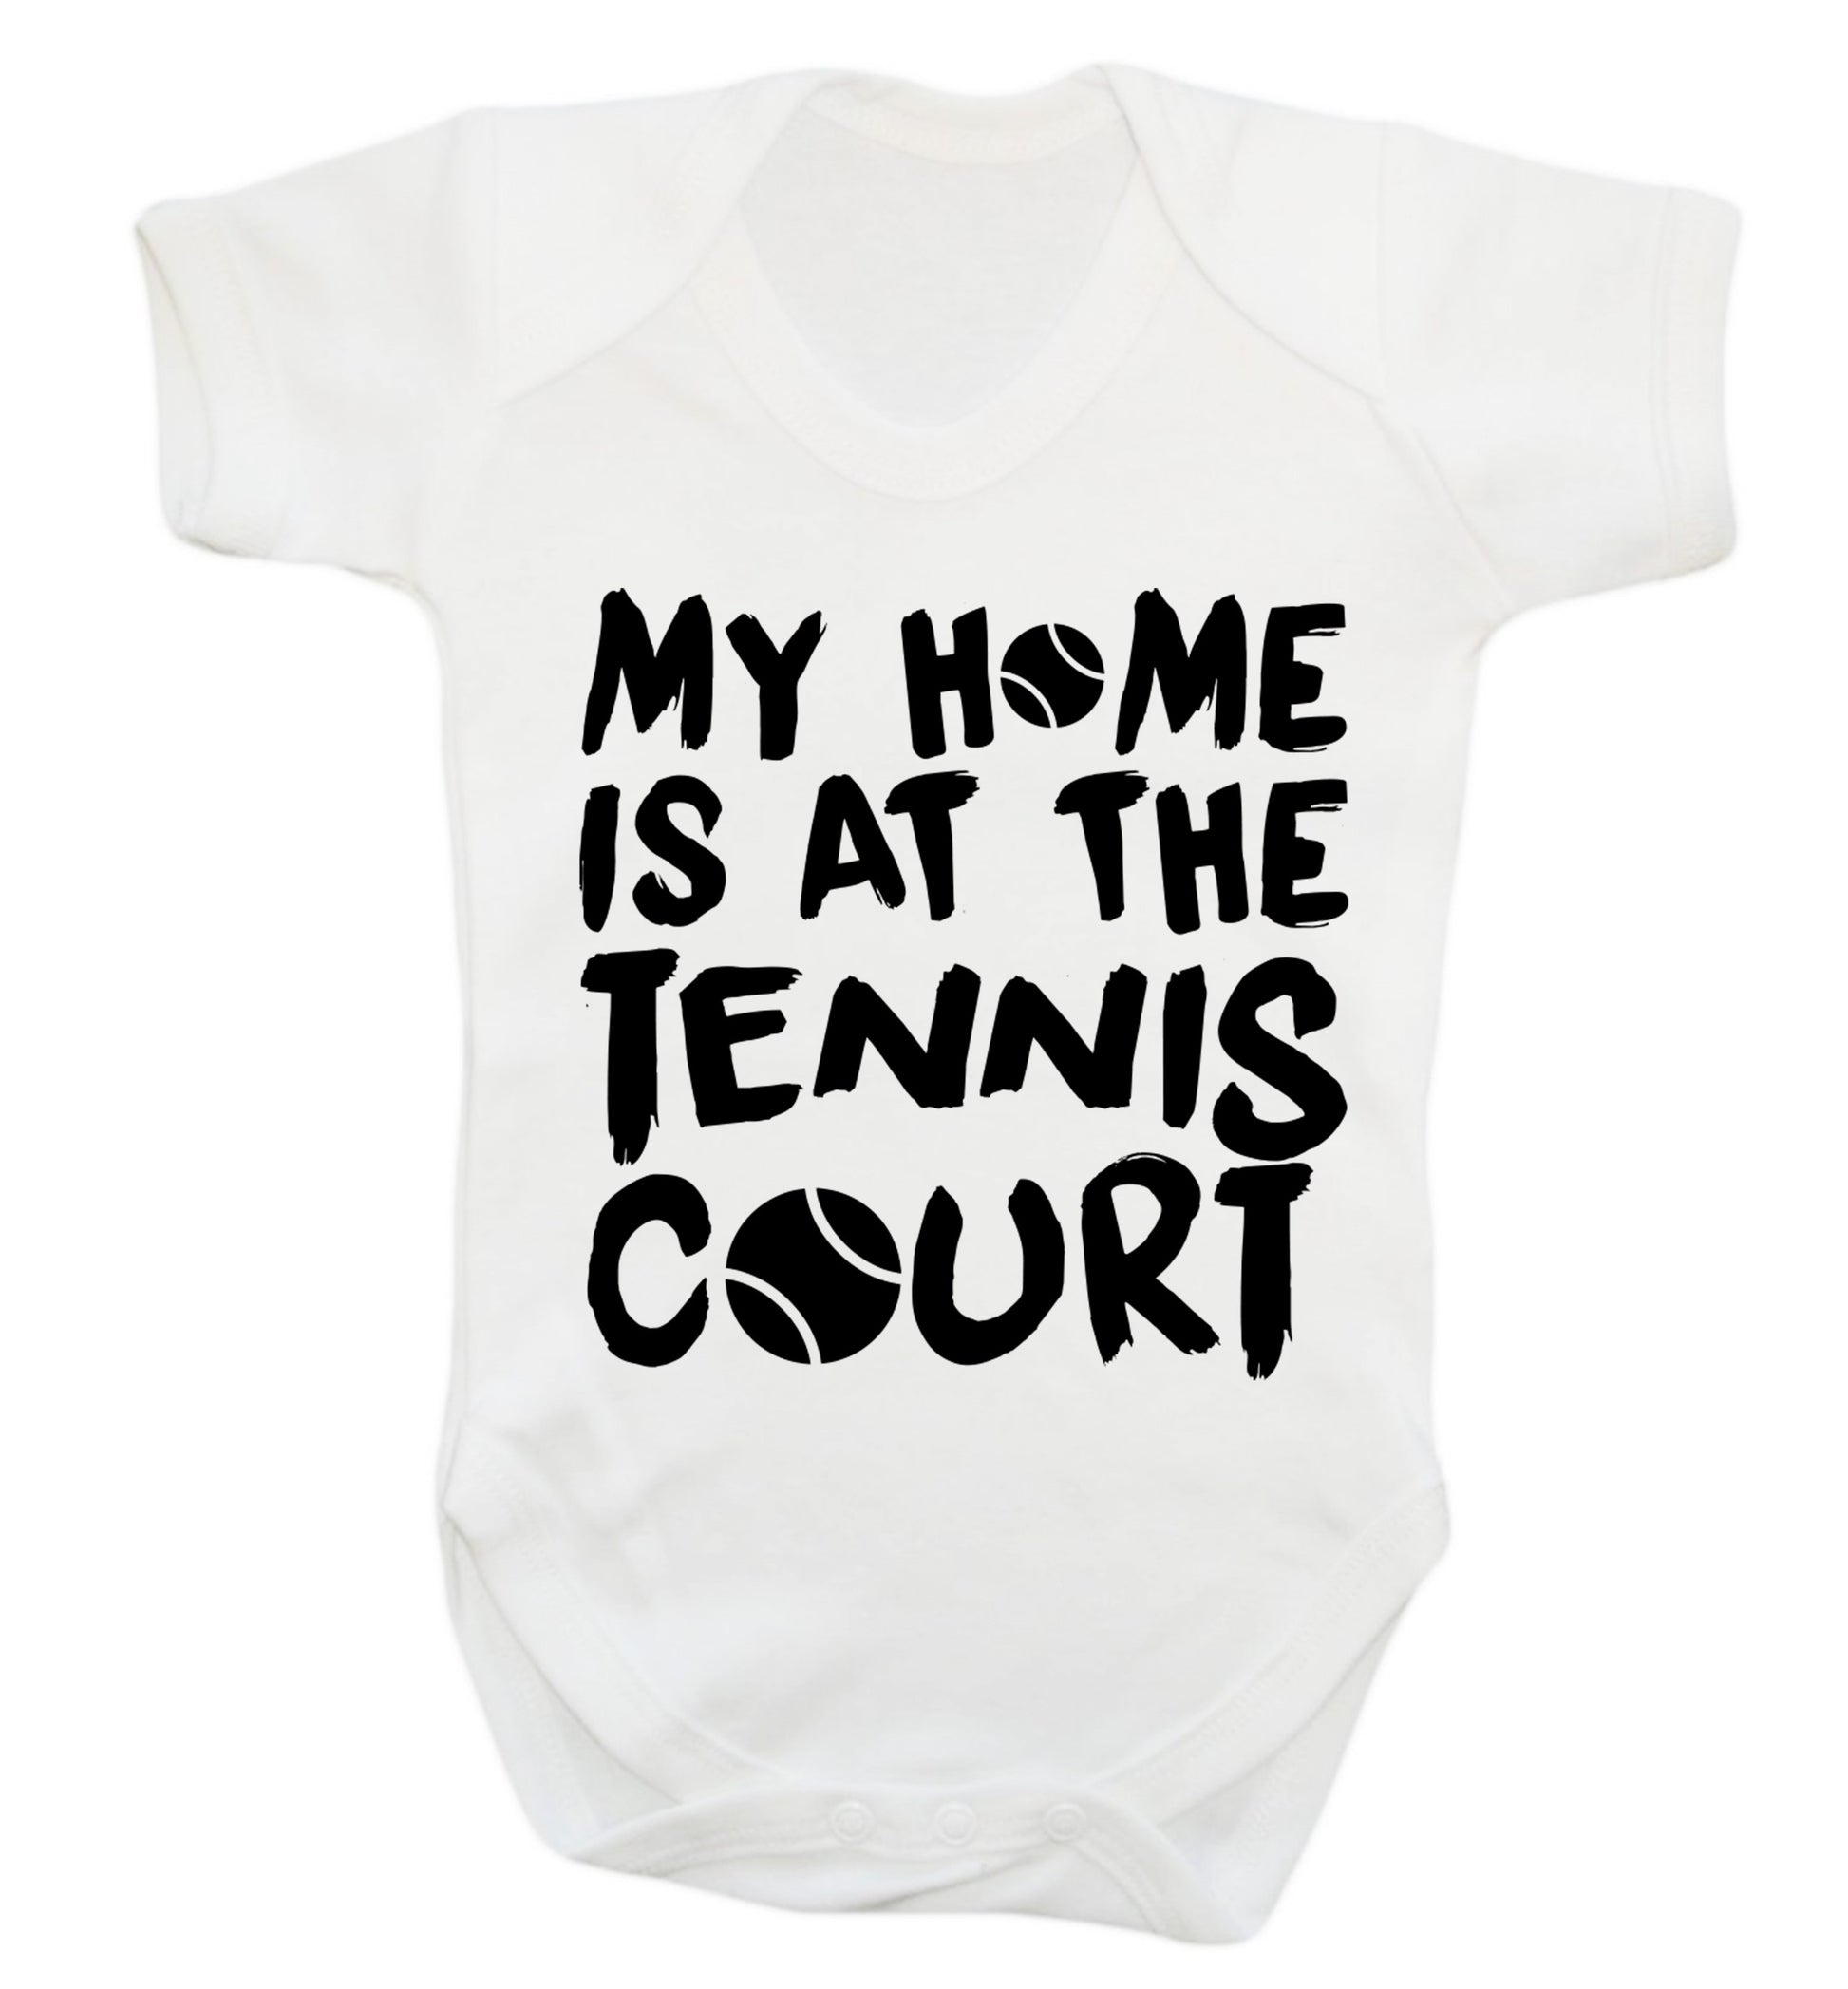 My home is at the tennis court Baby Vest white 18-24 months